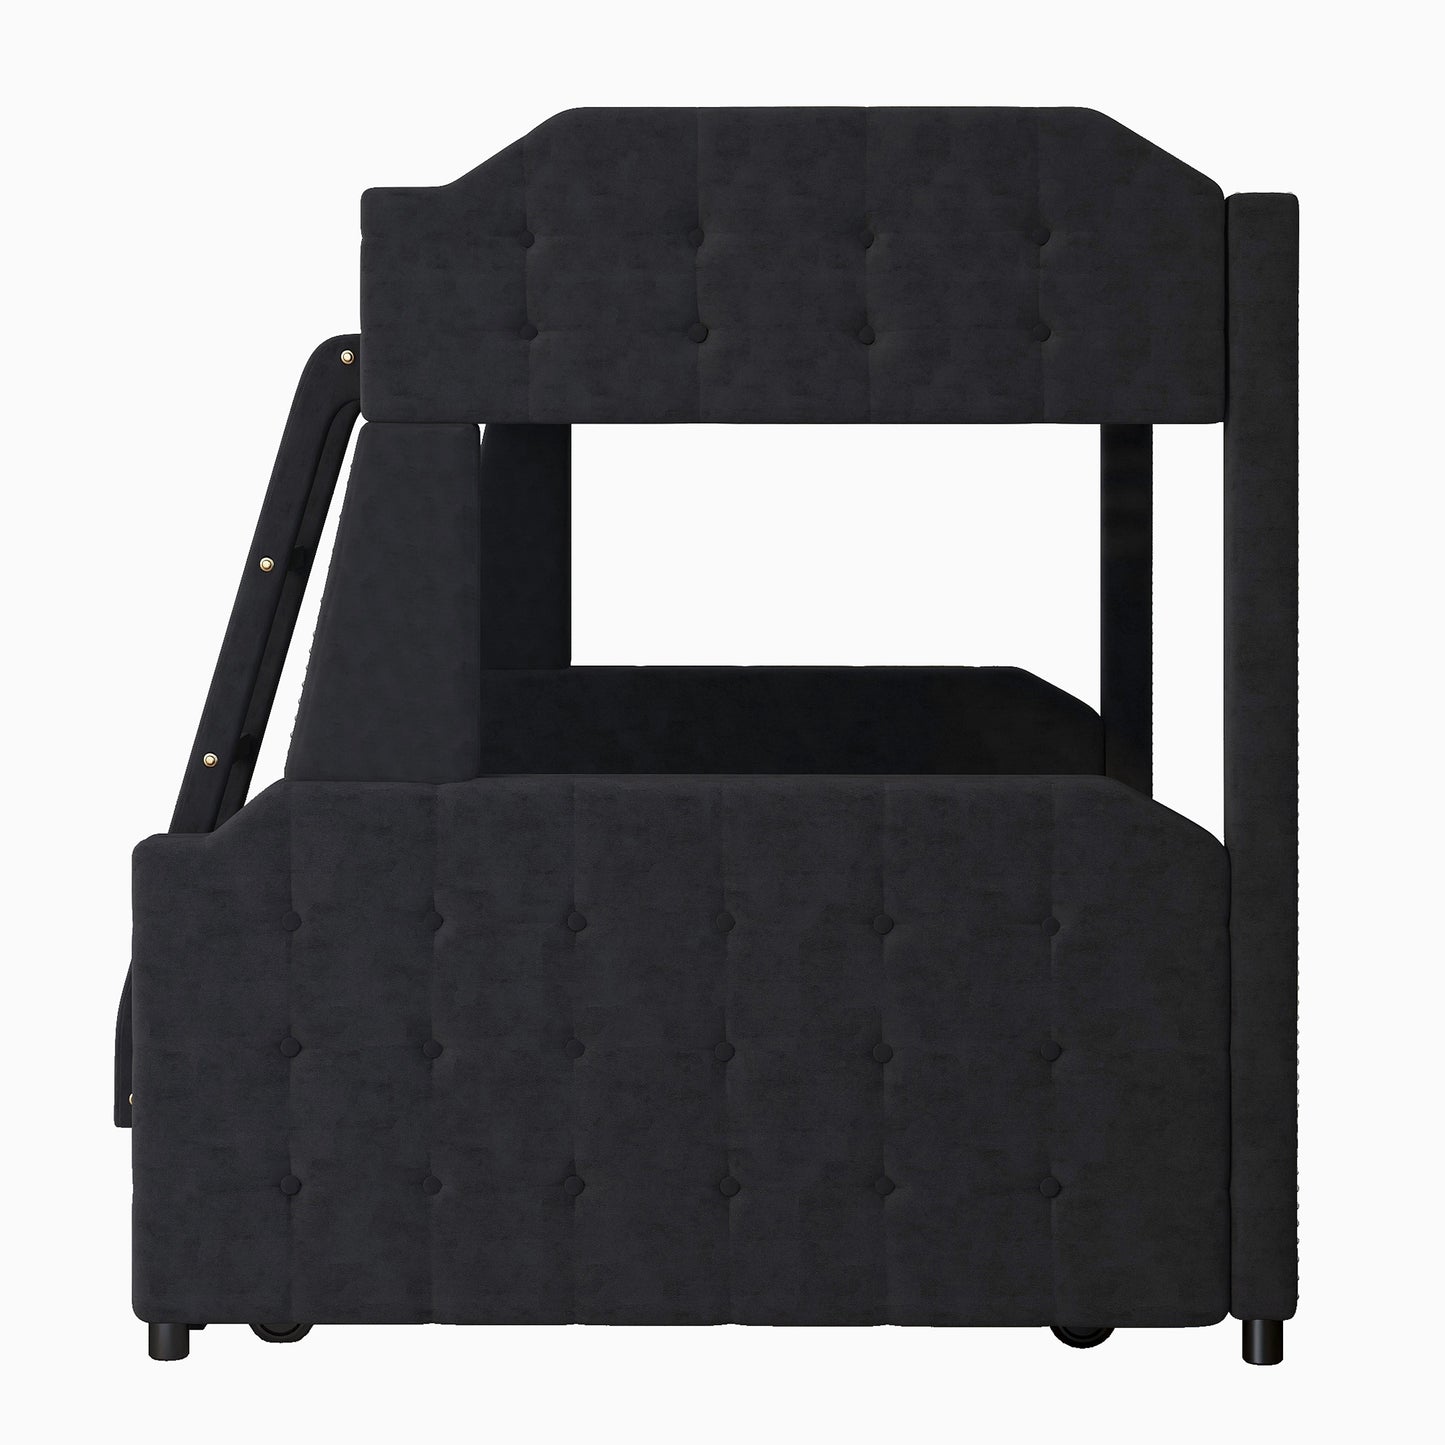 Twin over Full Upholstered Bunk Bed with Trundle and Ladder,Tufted Button Design,Black